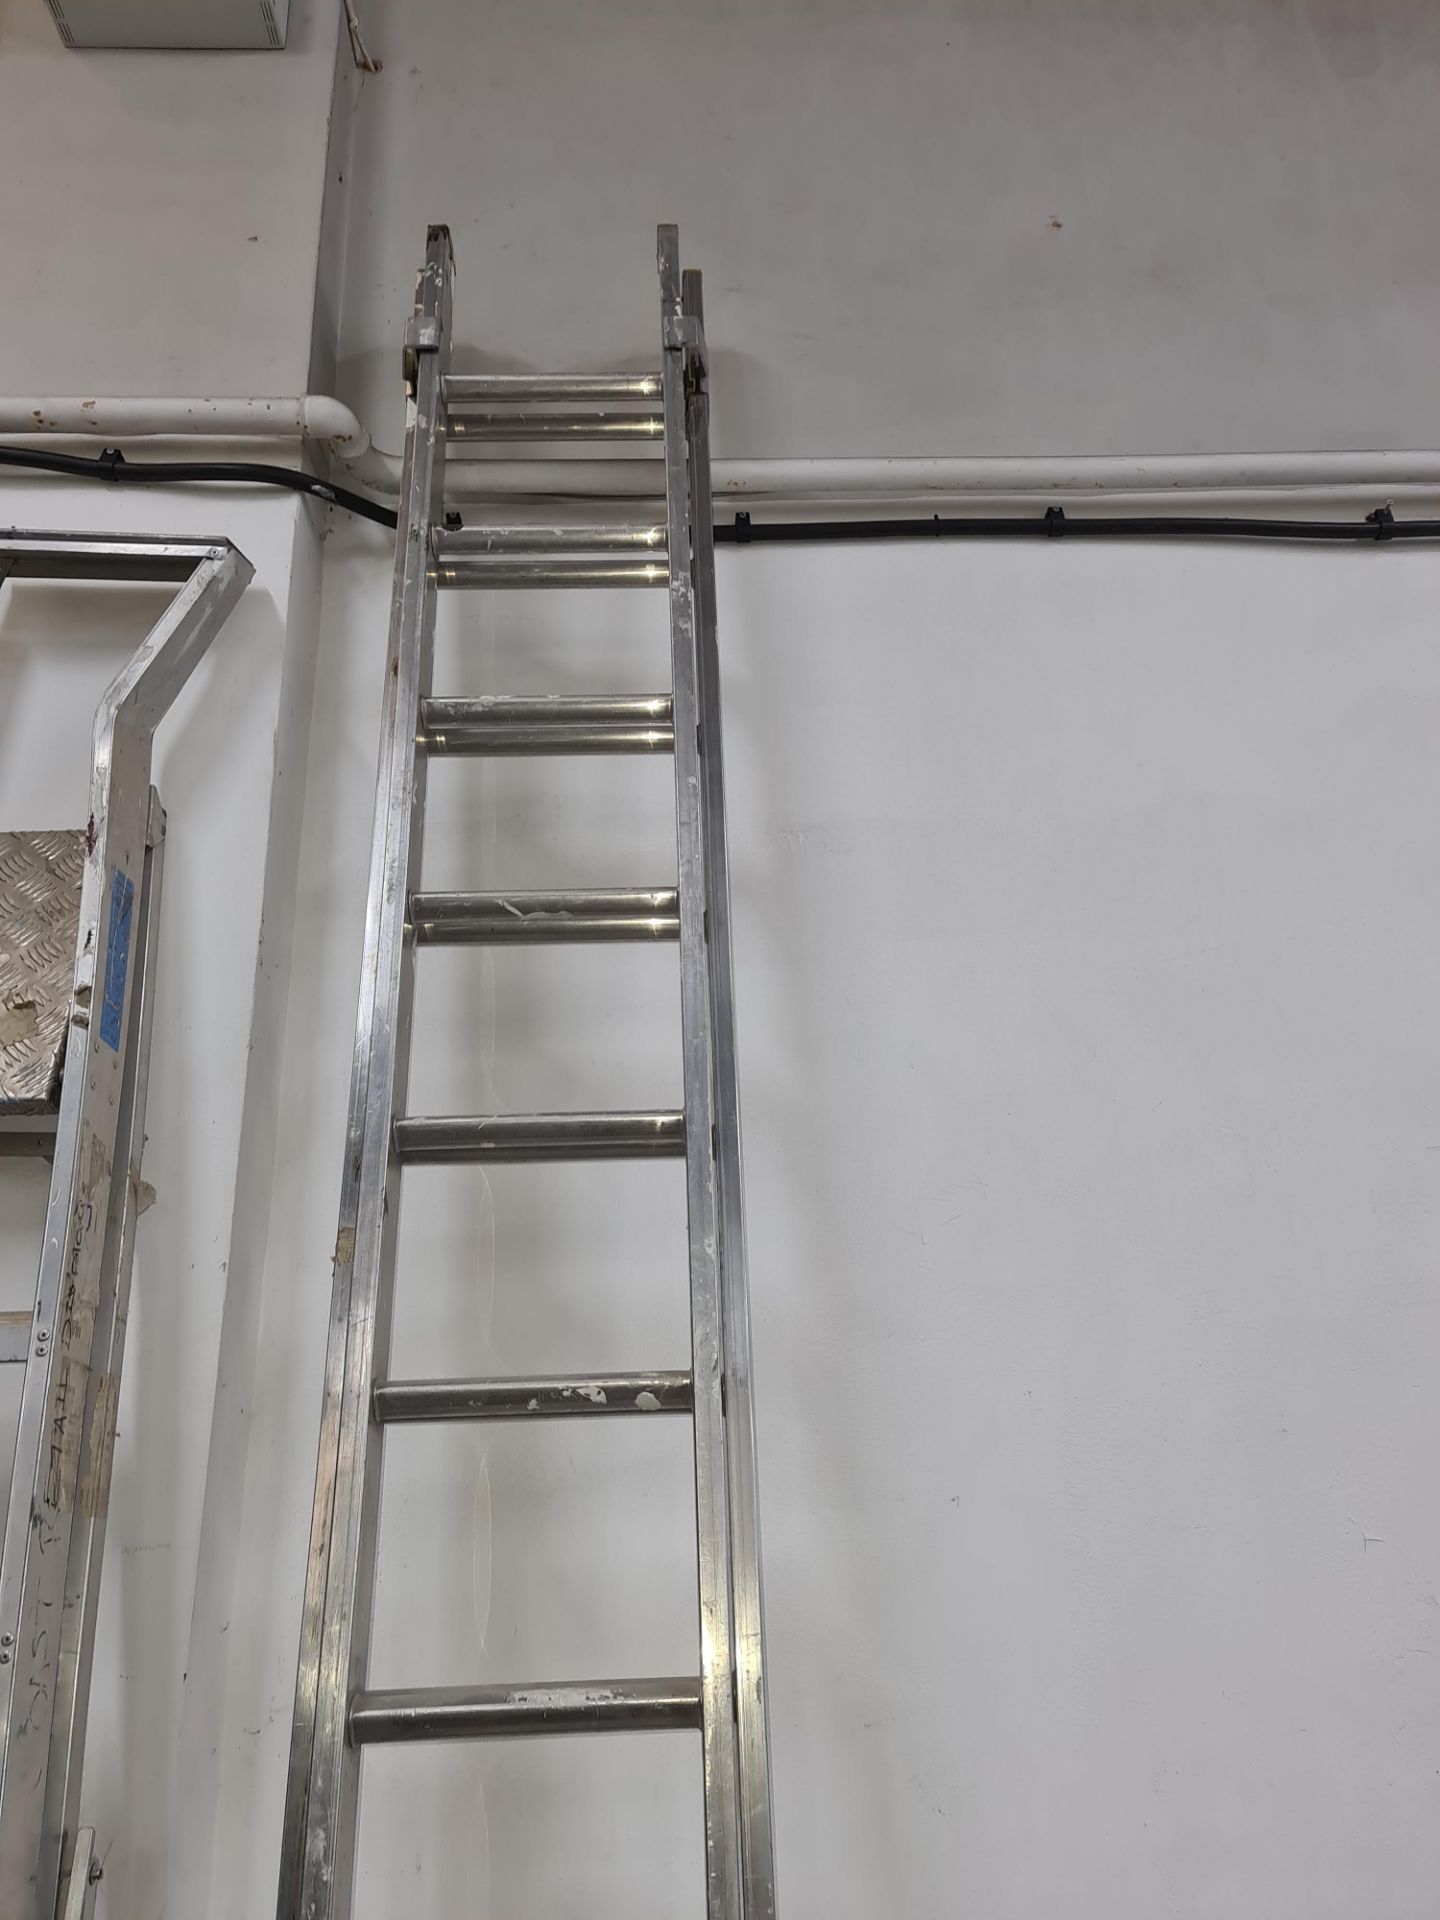 Set of double rung ladders, each length measuring approx. 11.5ft - Image 4 of 4